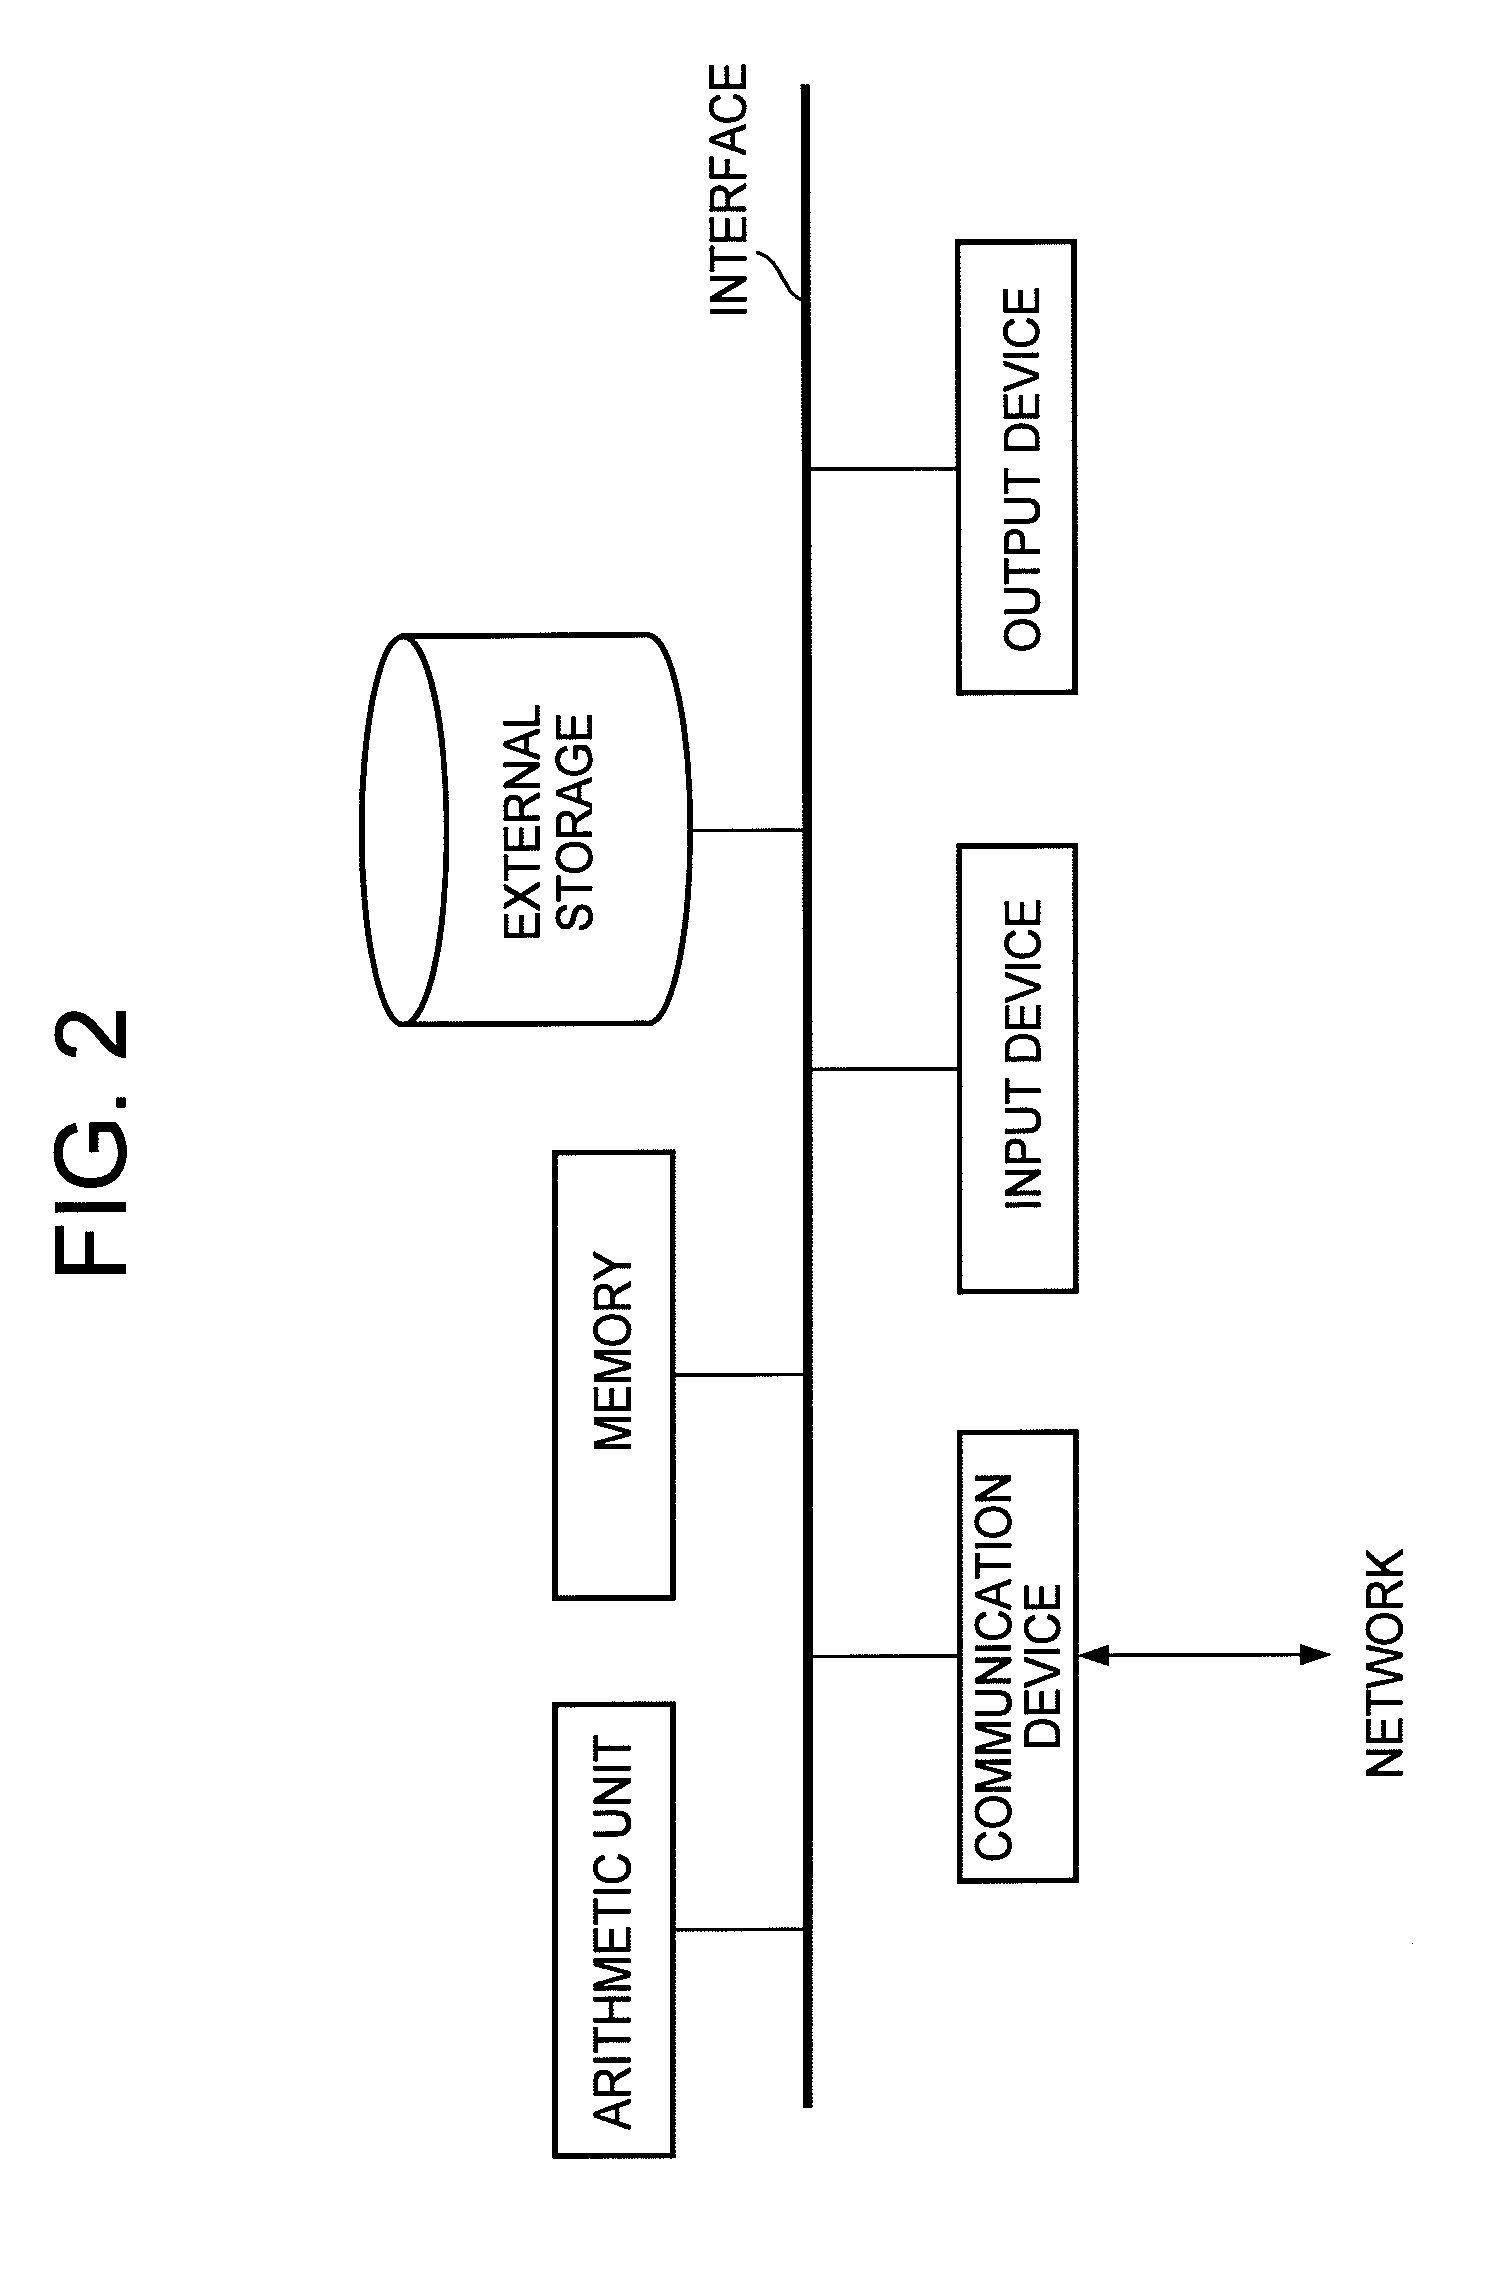 Network system which performs peer-to-peer communication